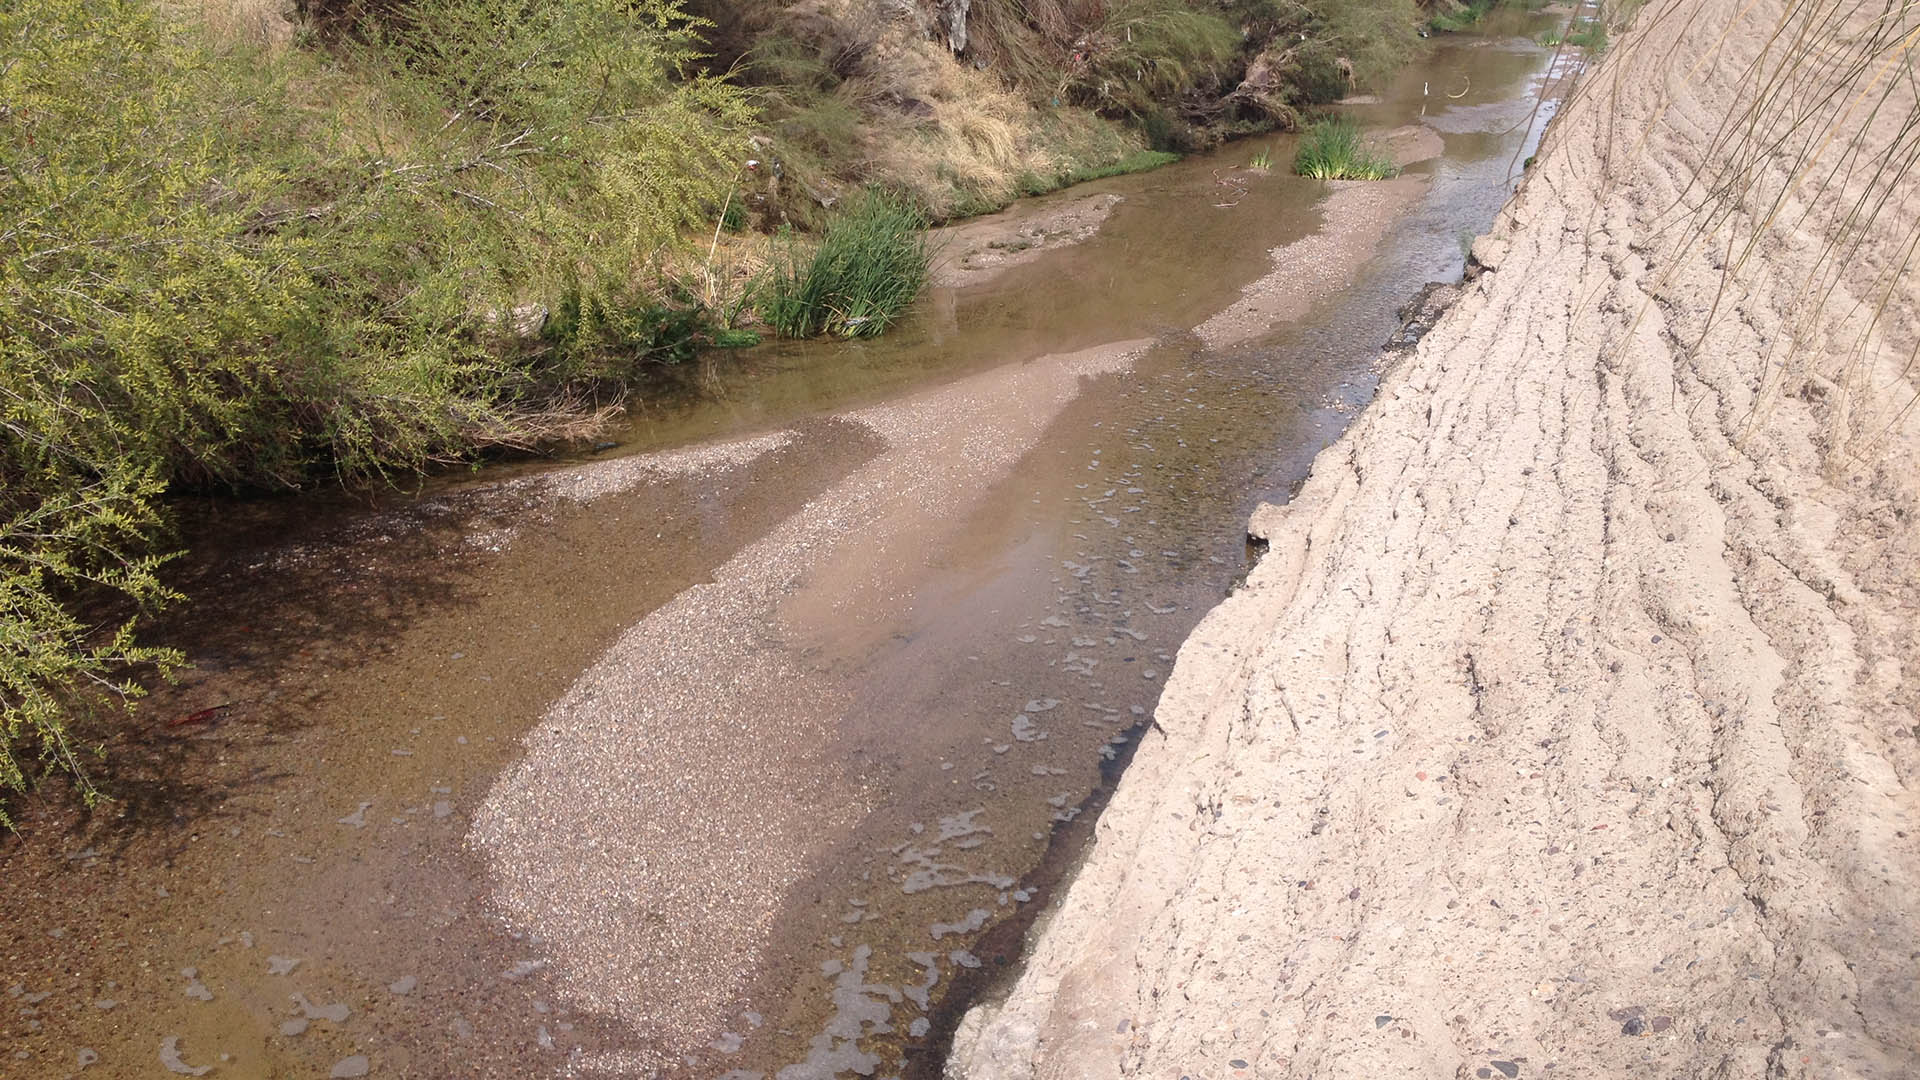 The Santa Cruz River flows downstream of the outflow from the Agua Dulce wastewater treatment plant.